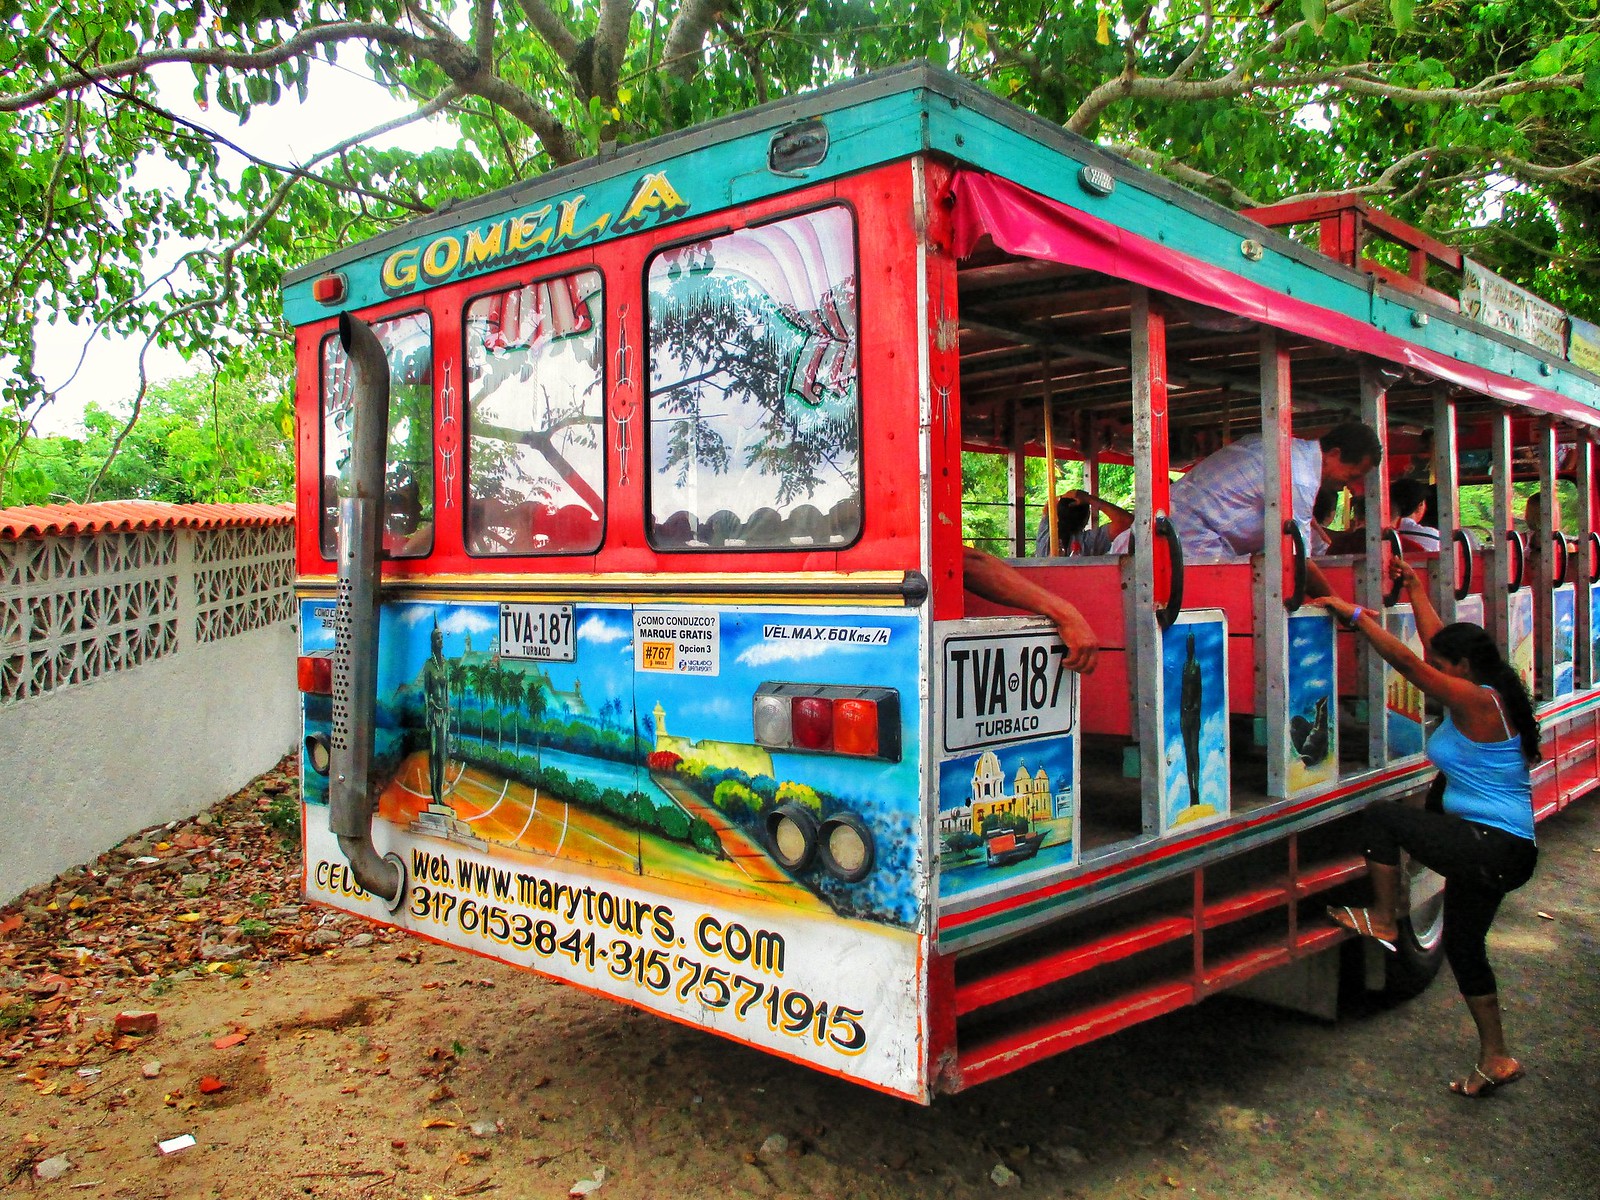 A painted chiva bus in Cartagena, Colombia